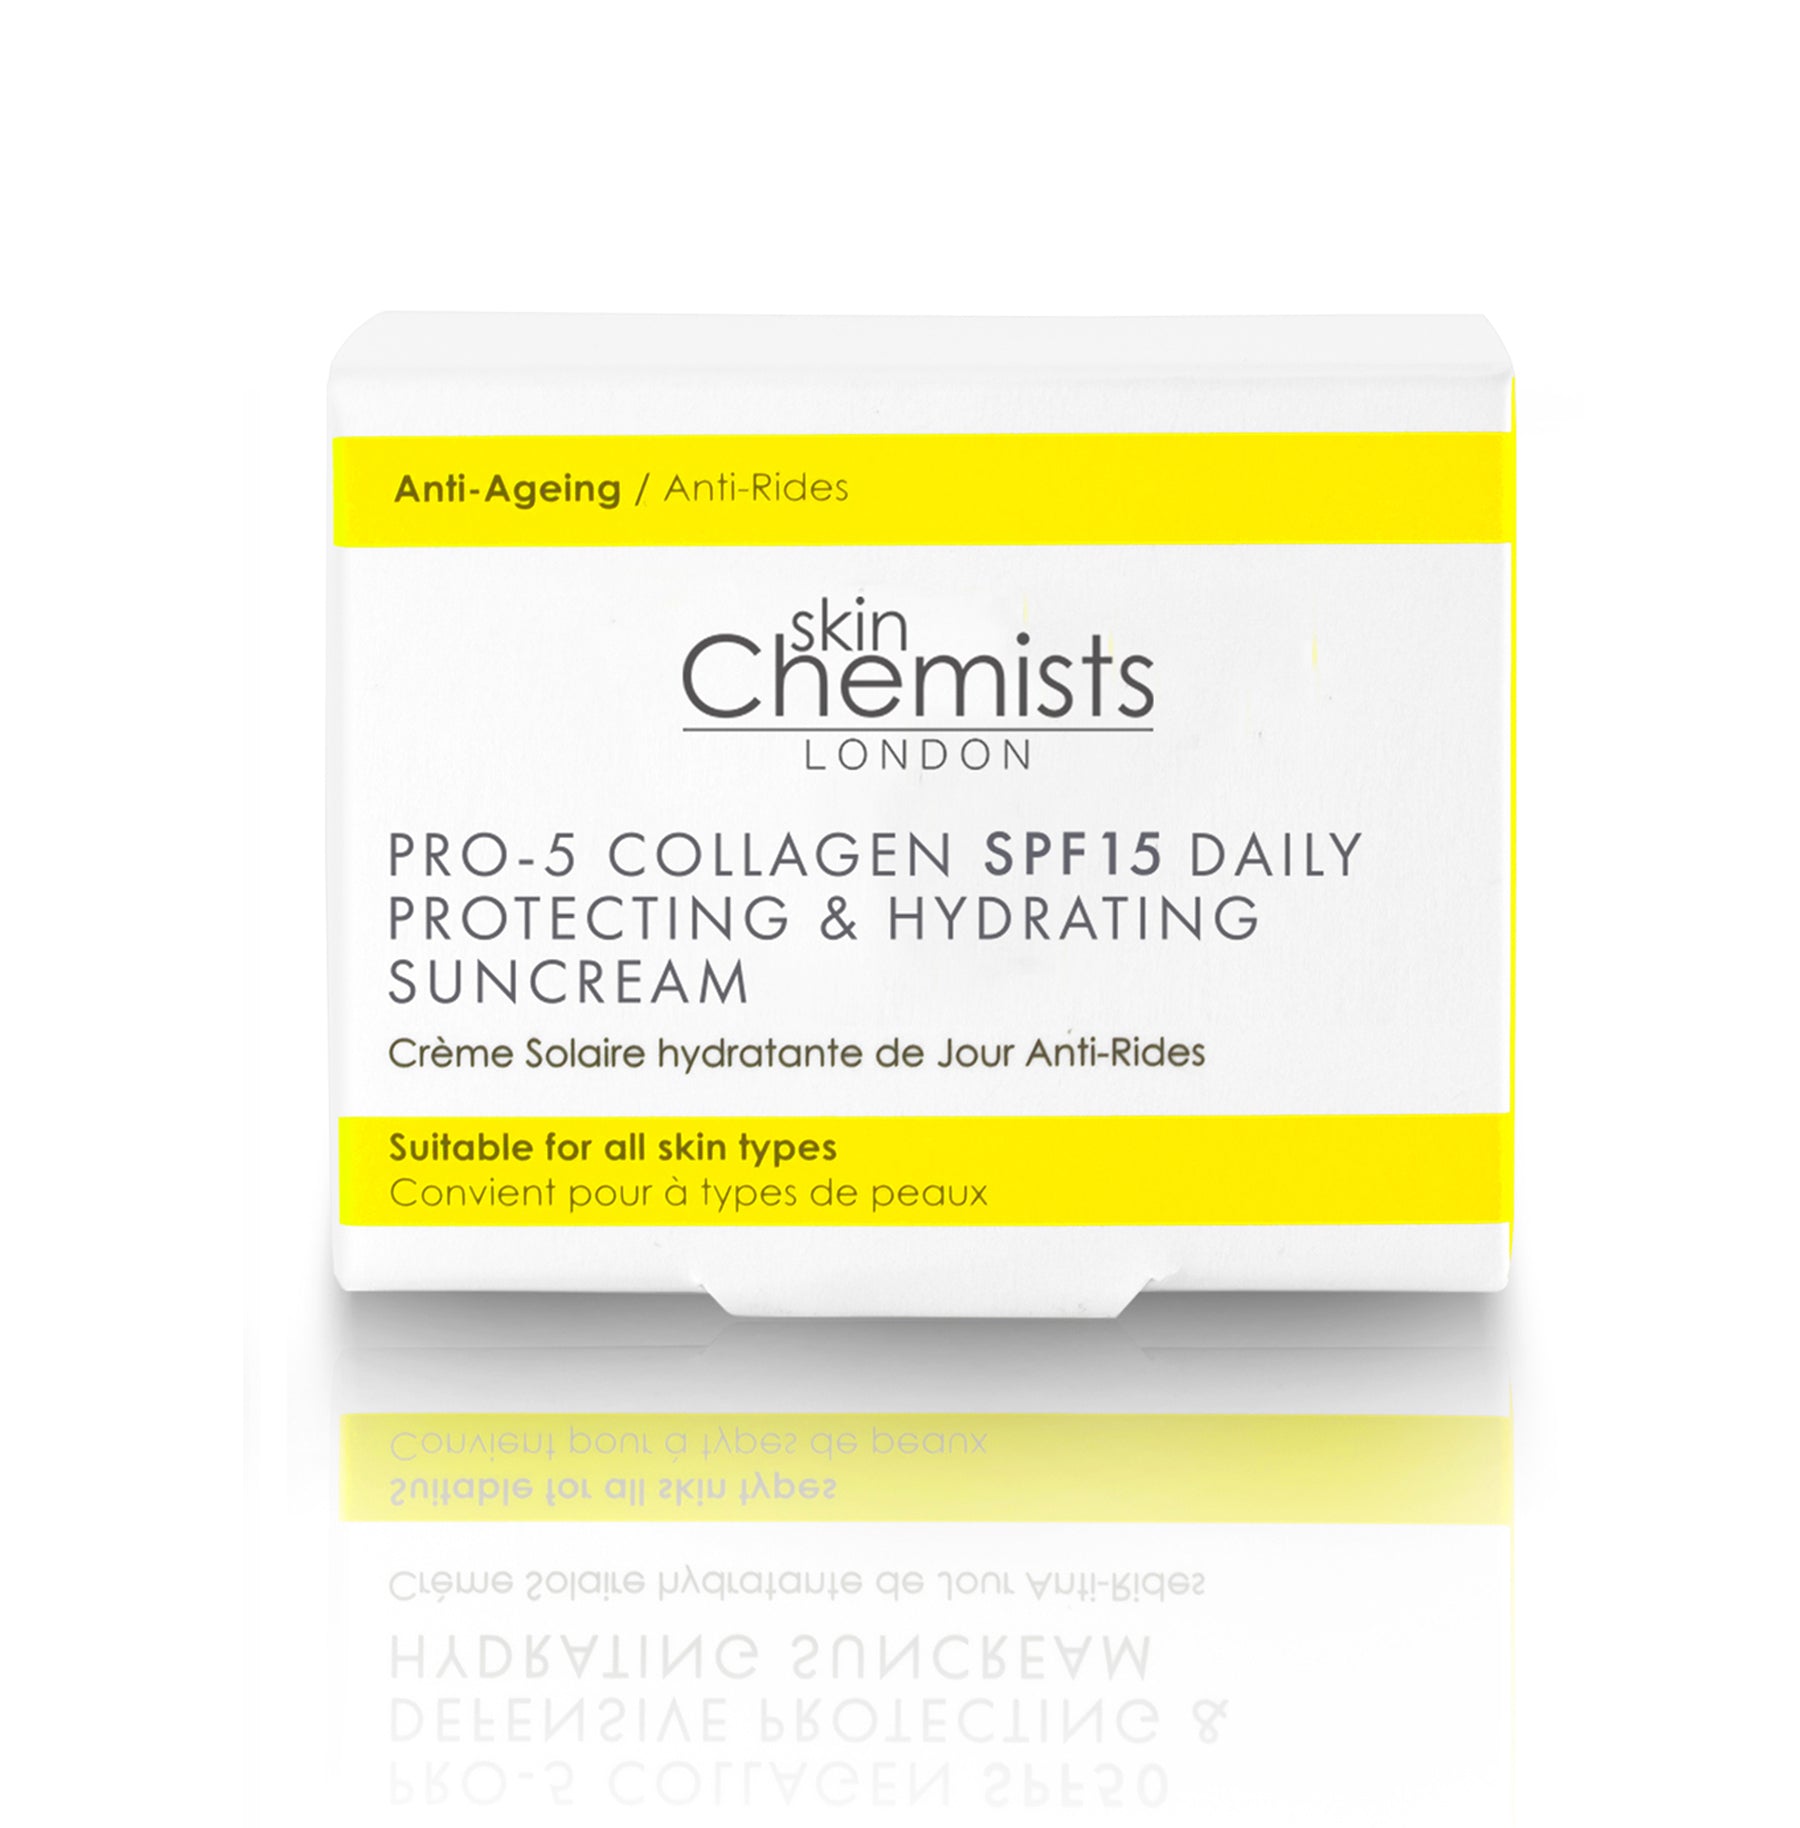 Pro-5 Collagen Daily Anti-Ageing Protecting & Hydrating Sun Cream SPF 15 50ml